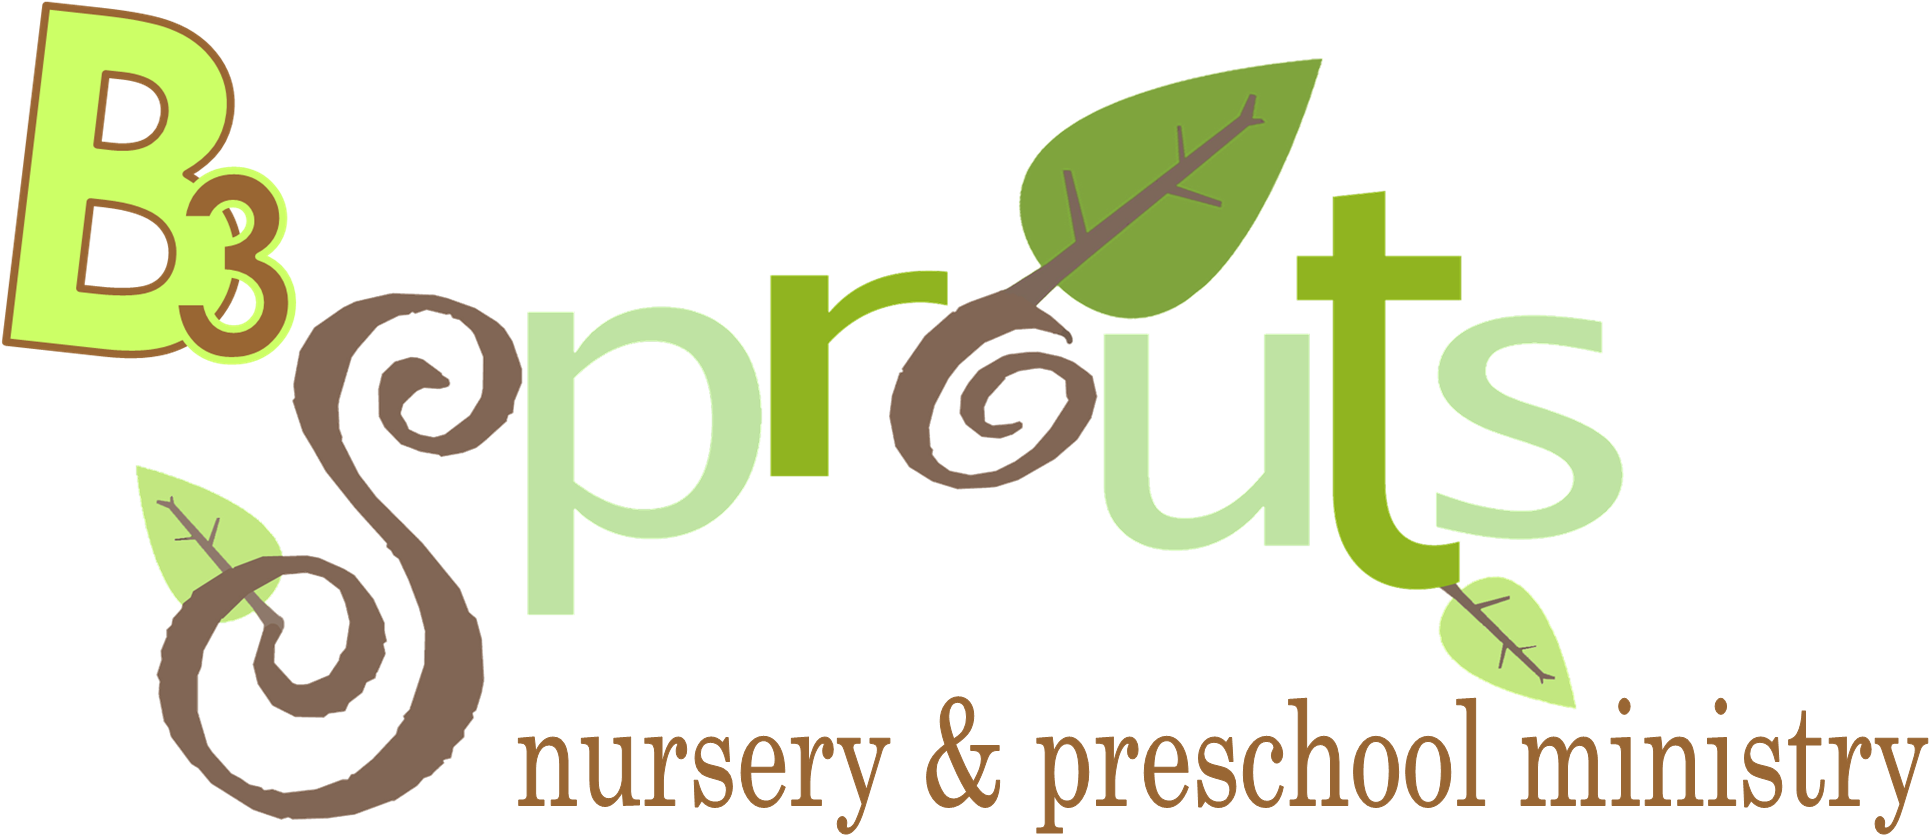 Eastgate Baptist Church Sprouts Nursery & Preschool - Sprout (2150x1363)